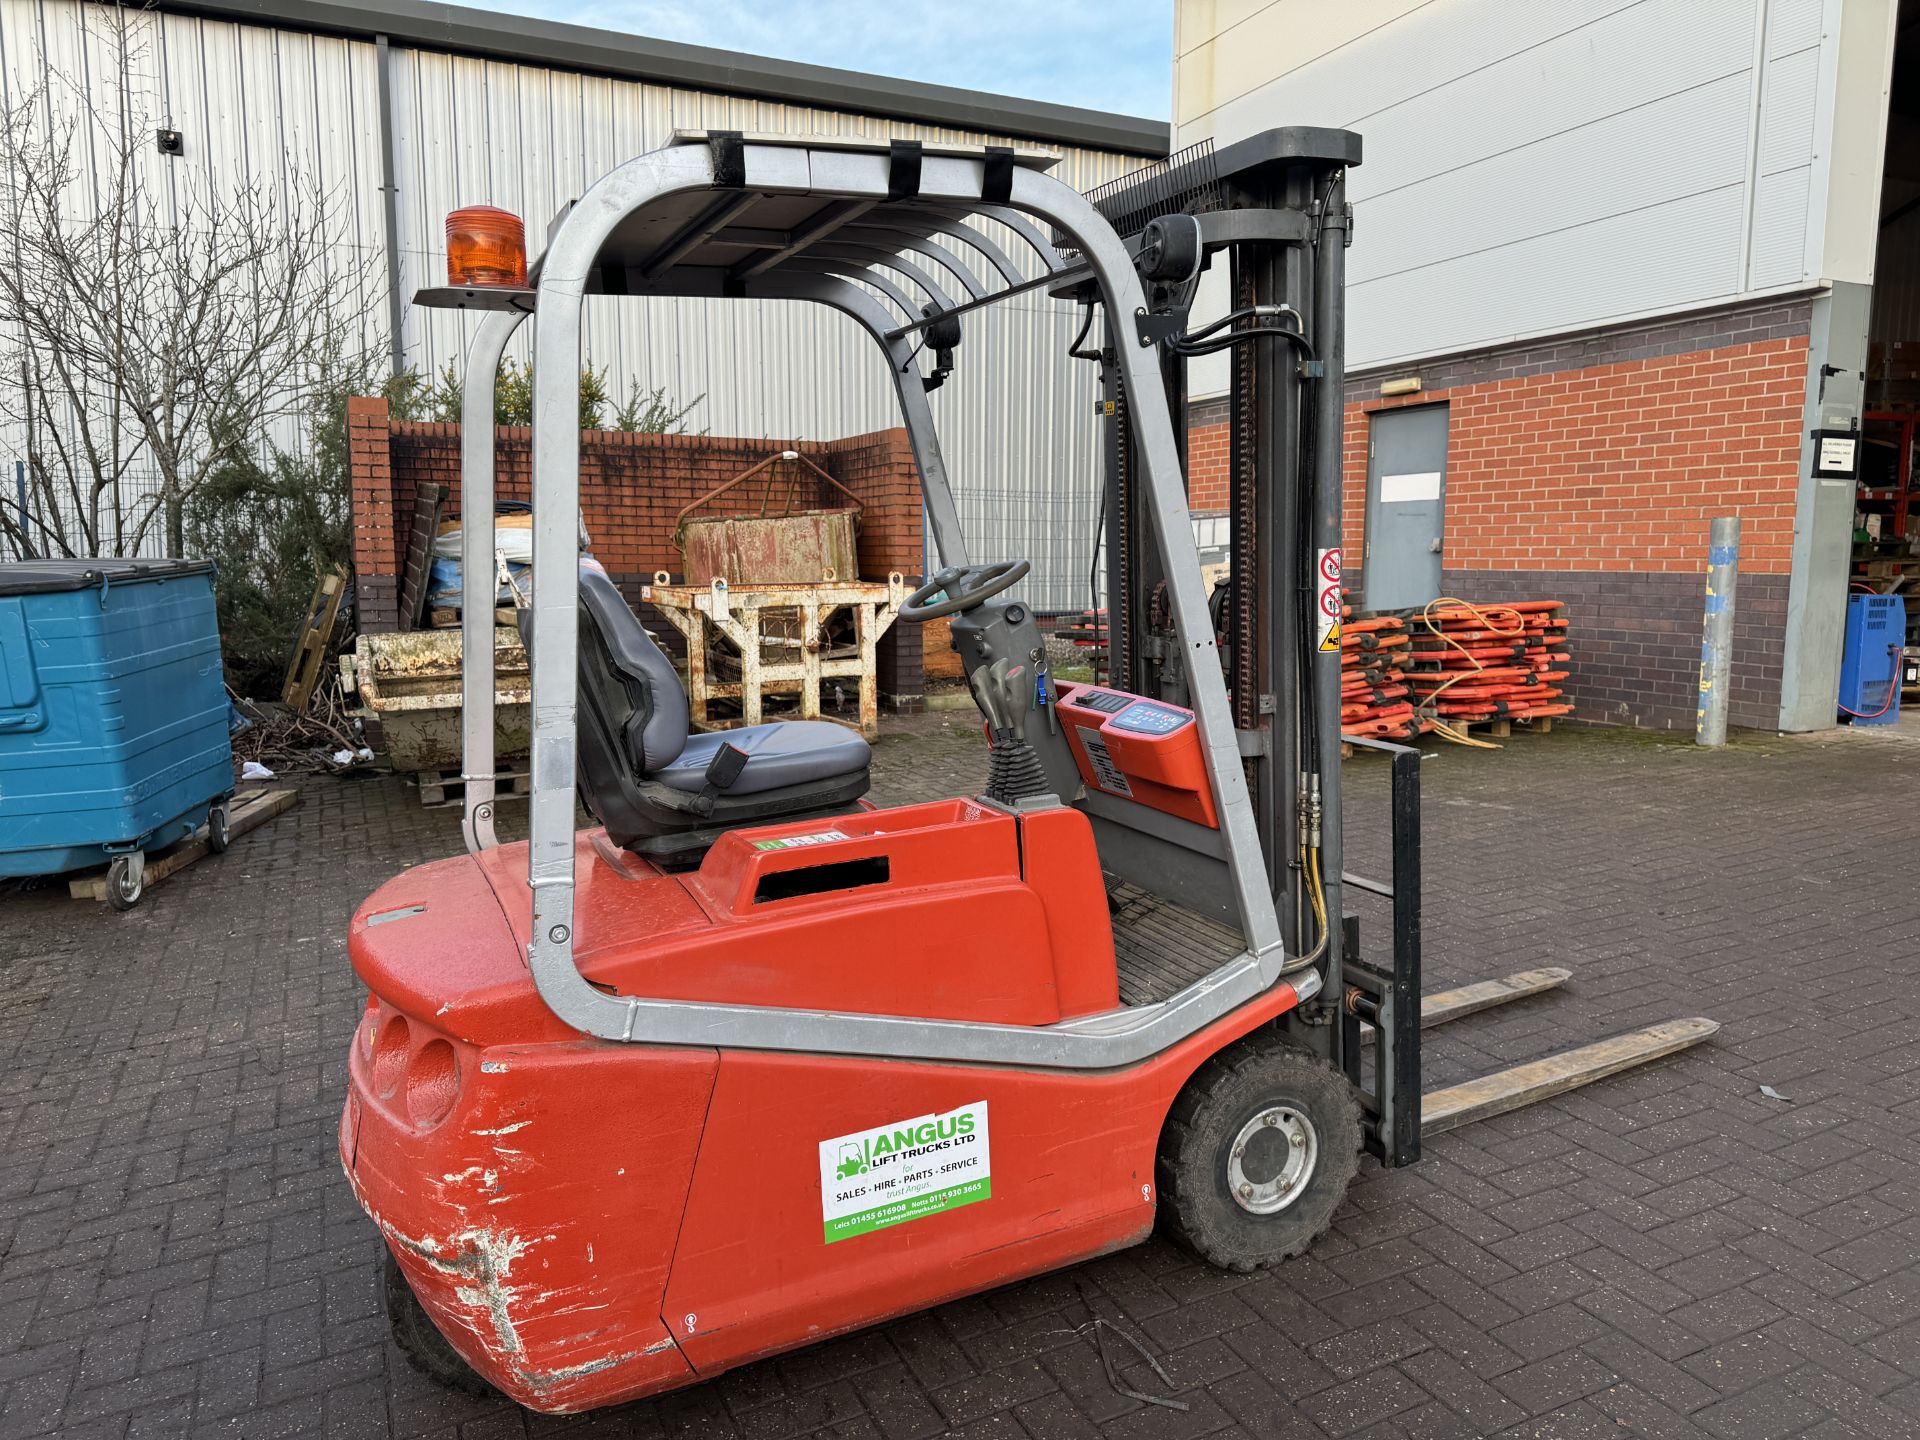 Cargo Model C 3 E 150 Tri Wheel Container Specification Electric Reach Truck - Image 5 of 28